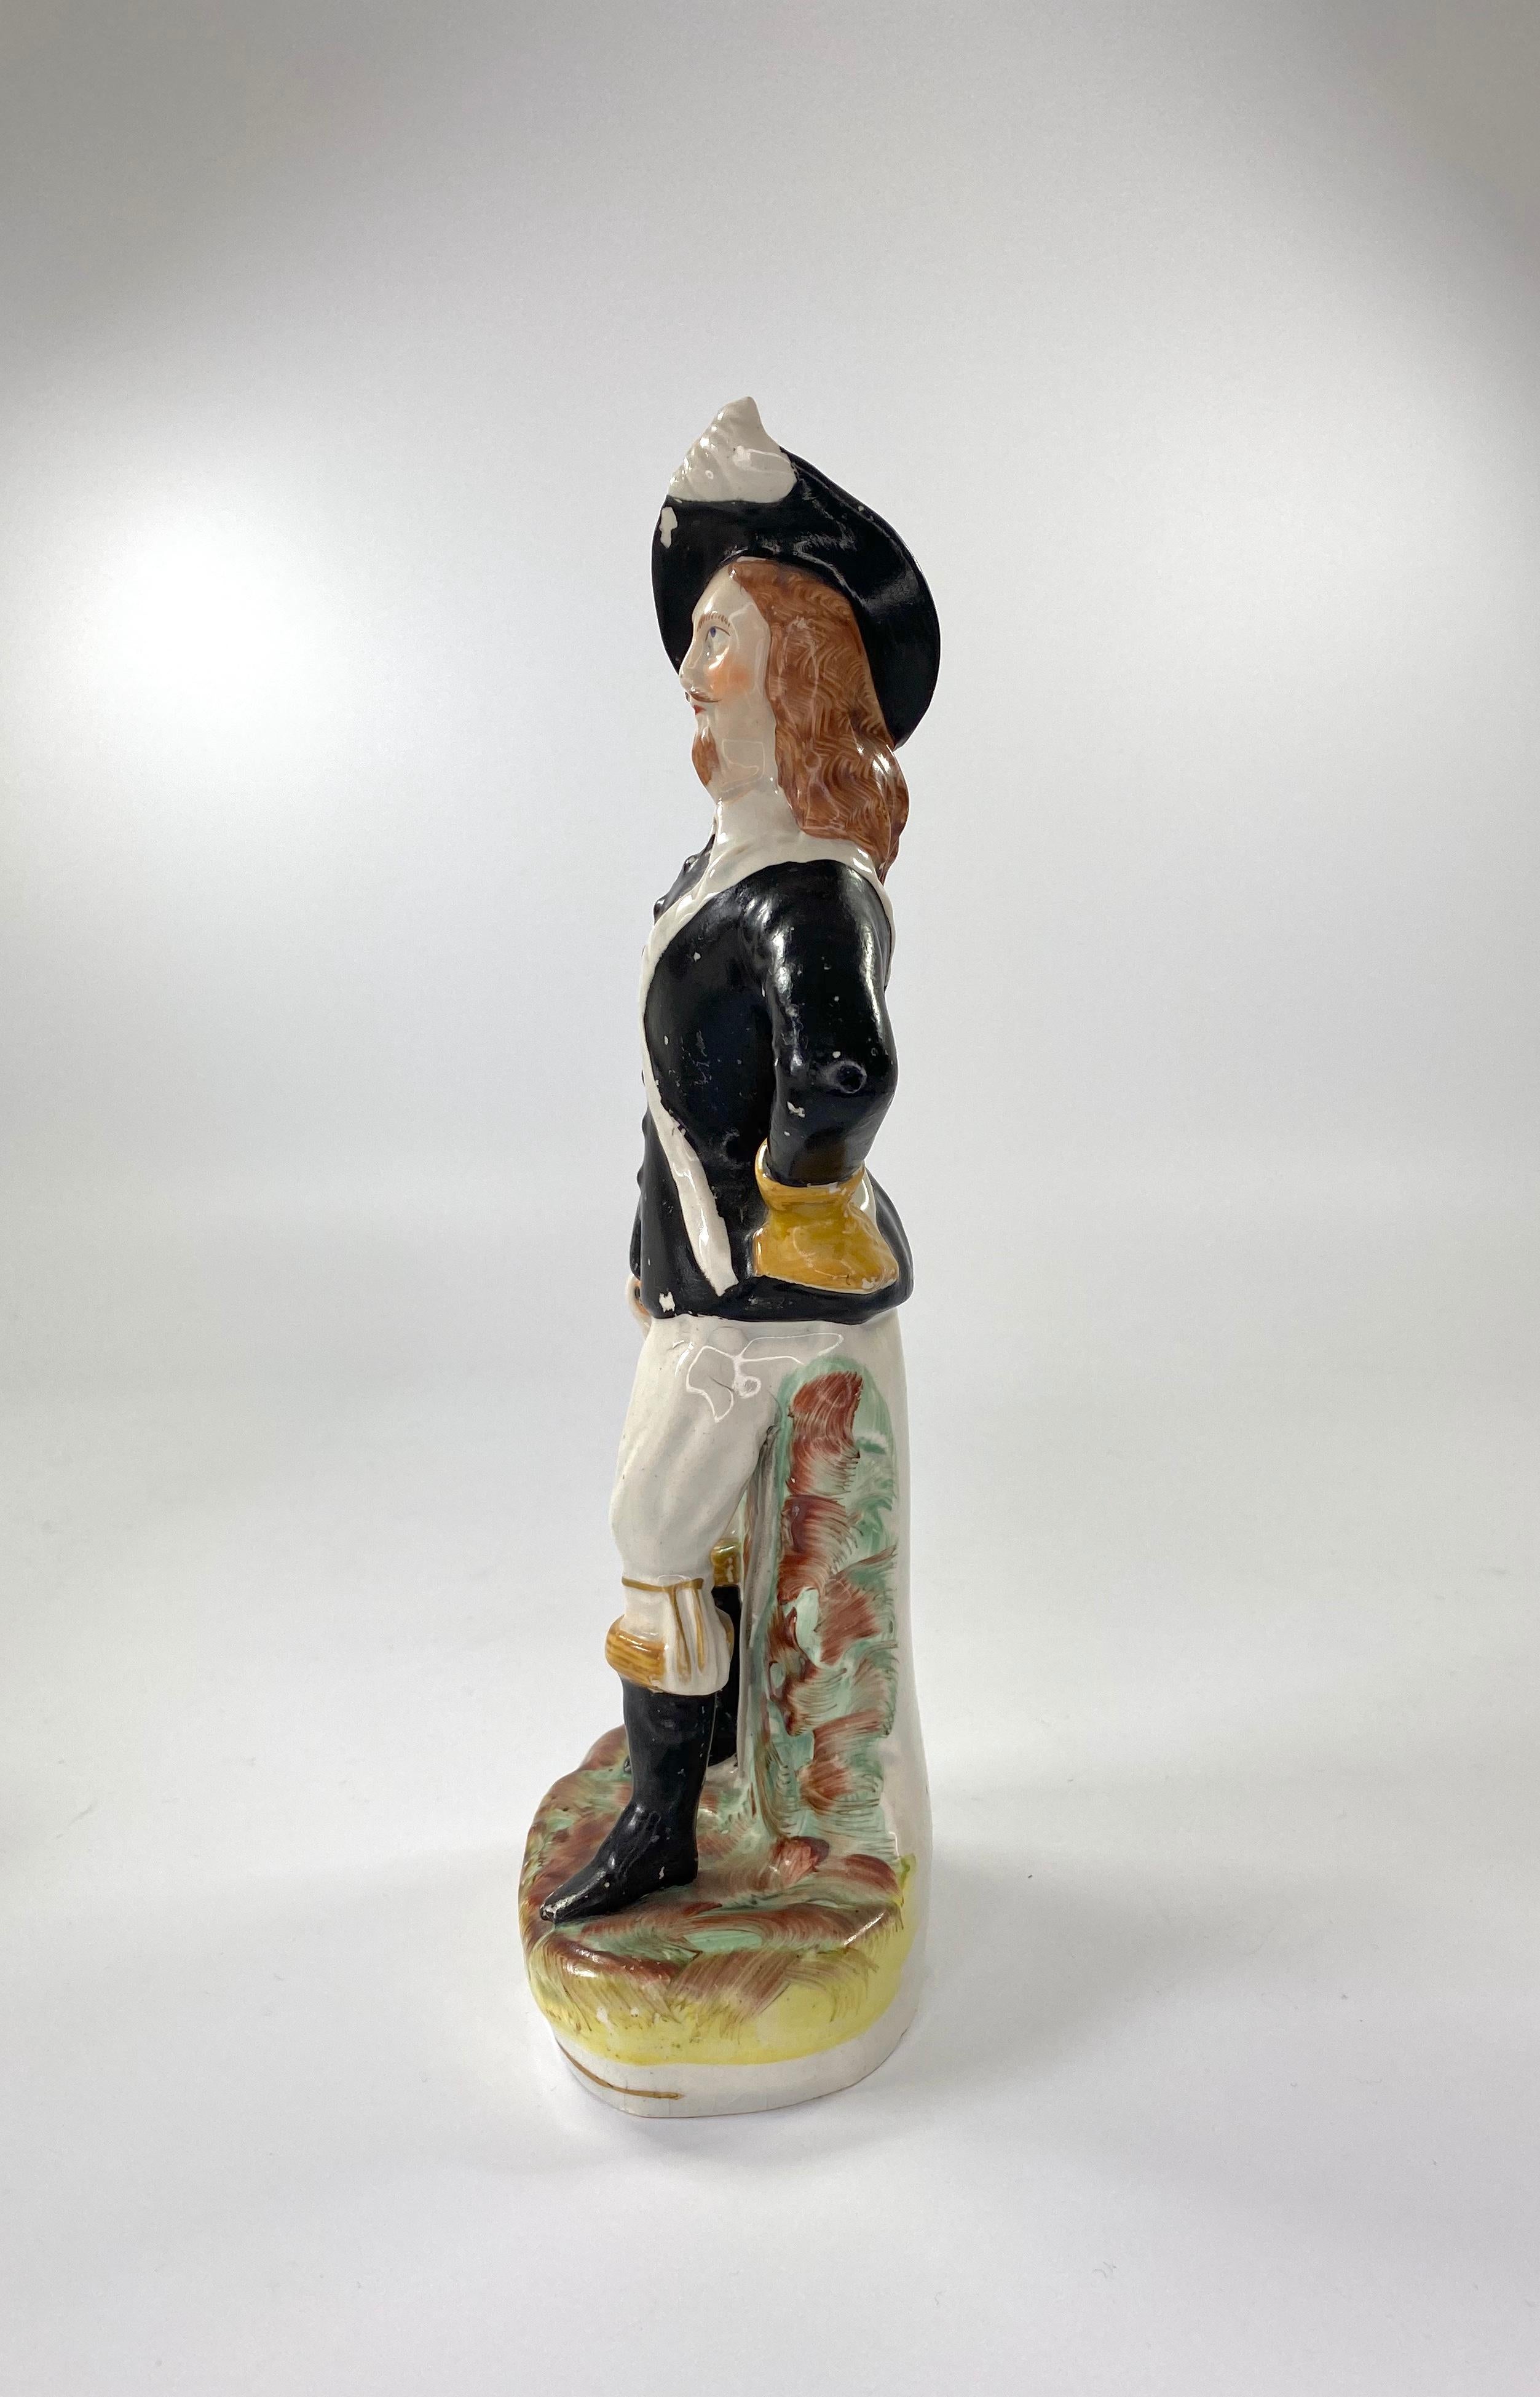 Fired Staffordshire Pottery King Charles I, c. 1860